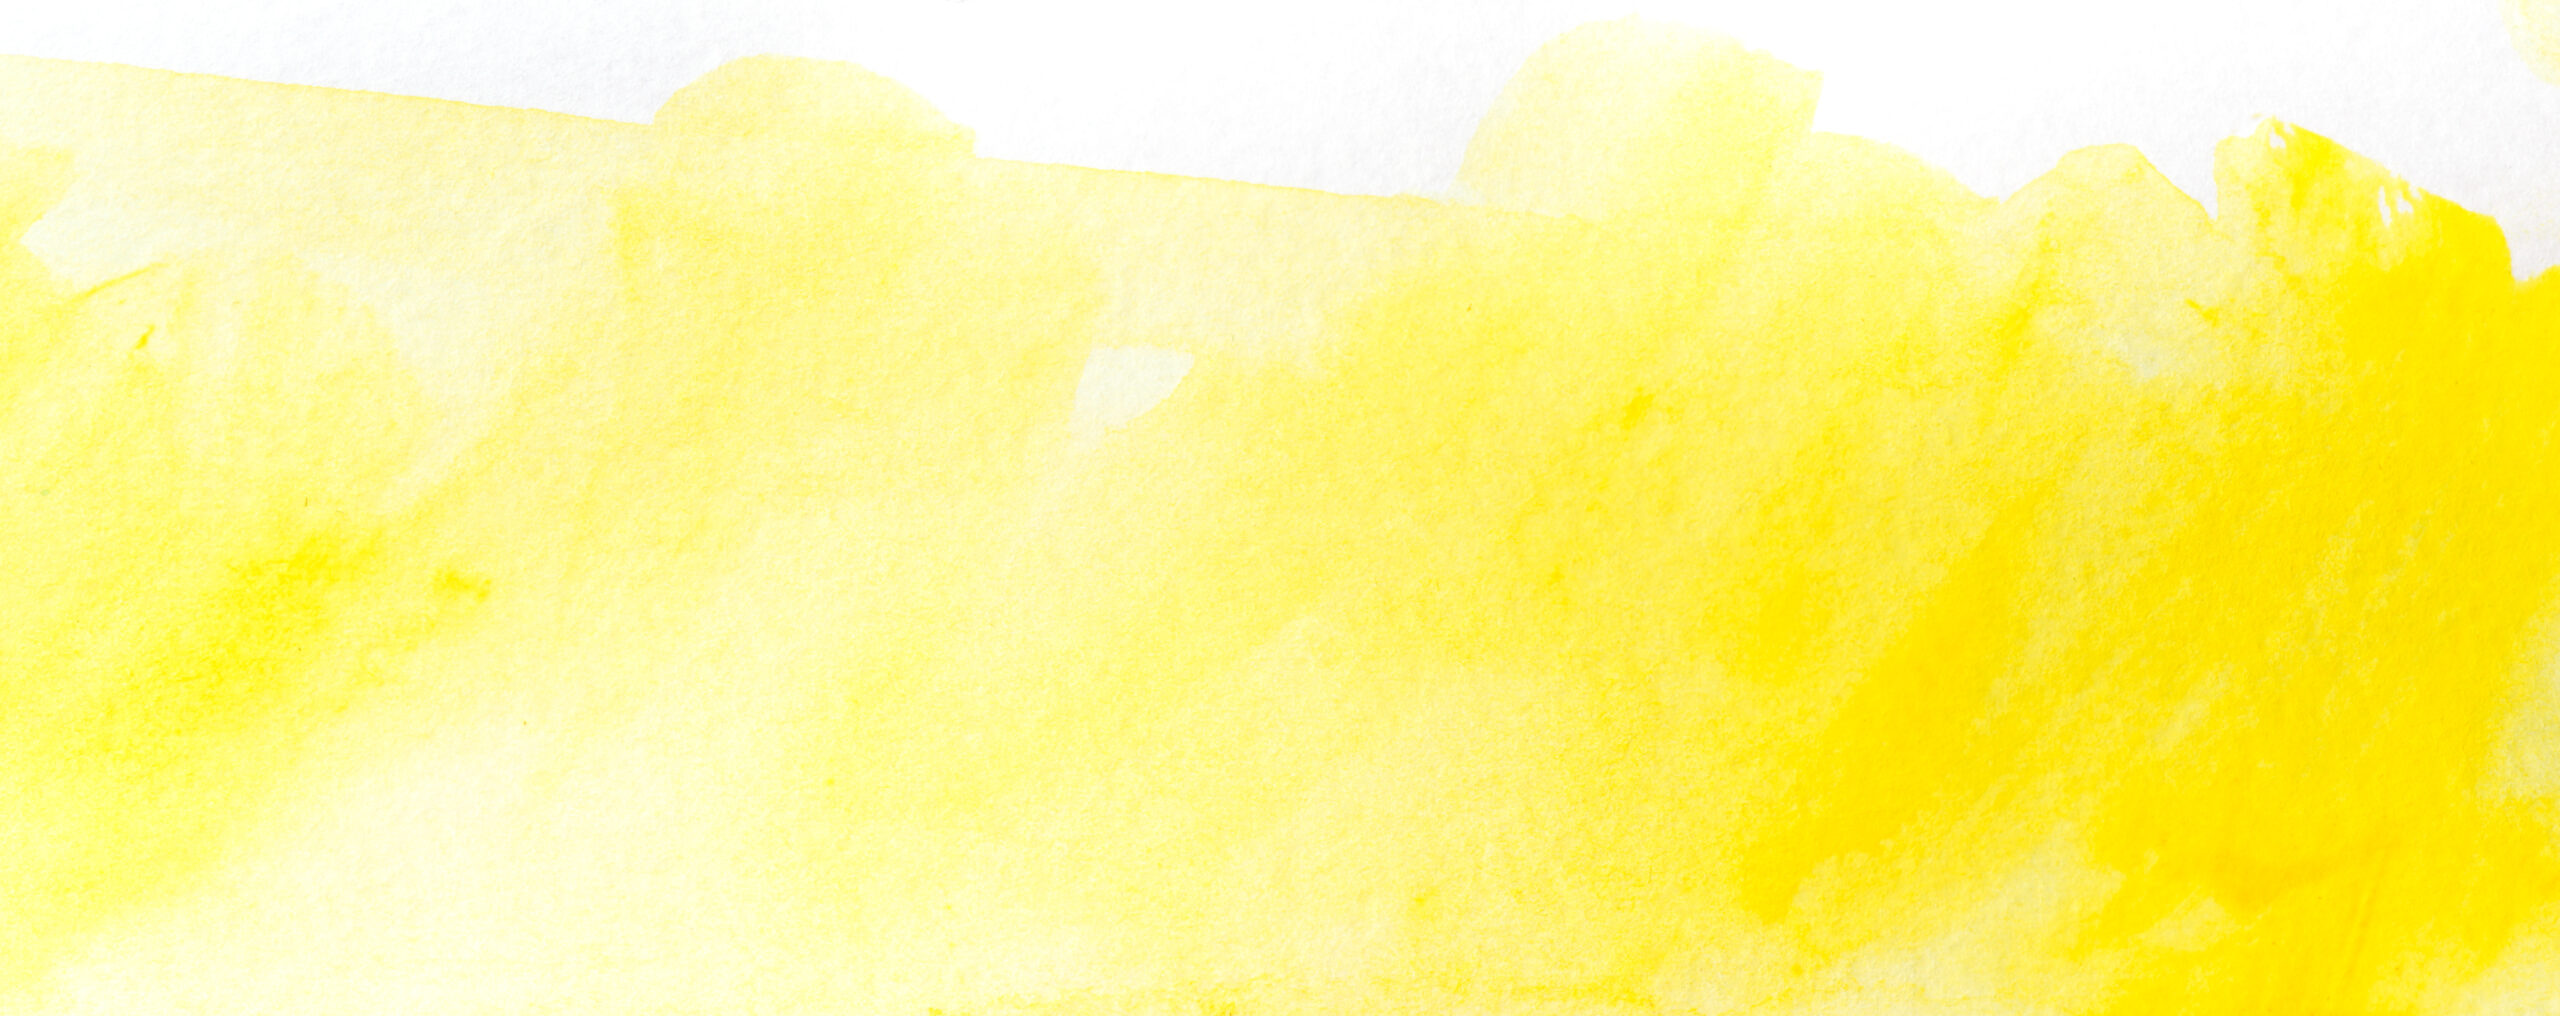 yellow watercolor stain drawn by hand. on paper with texture.